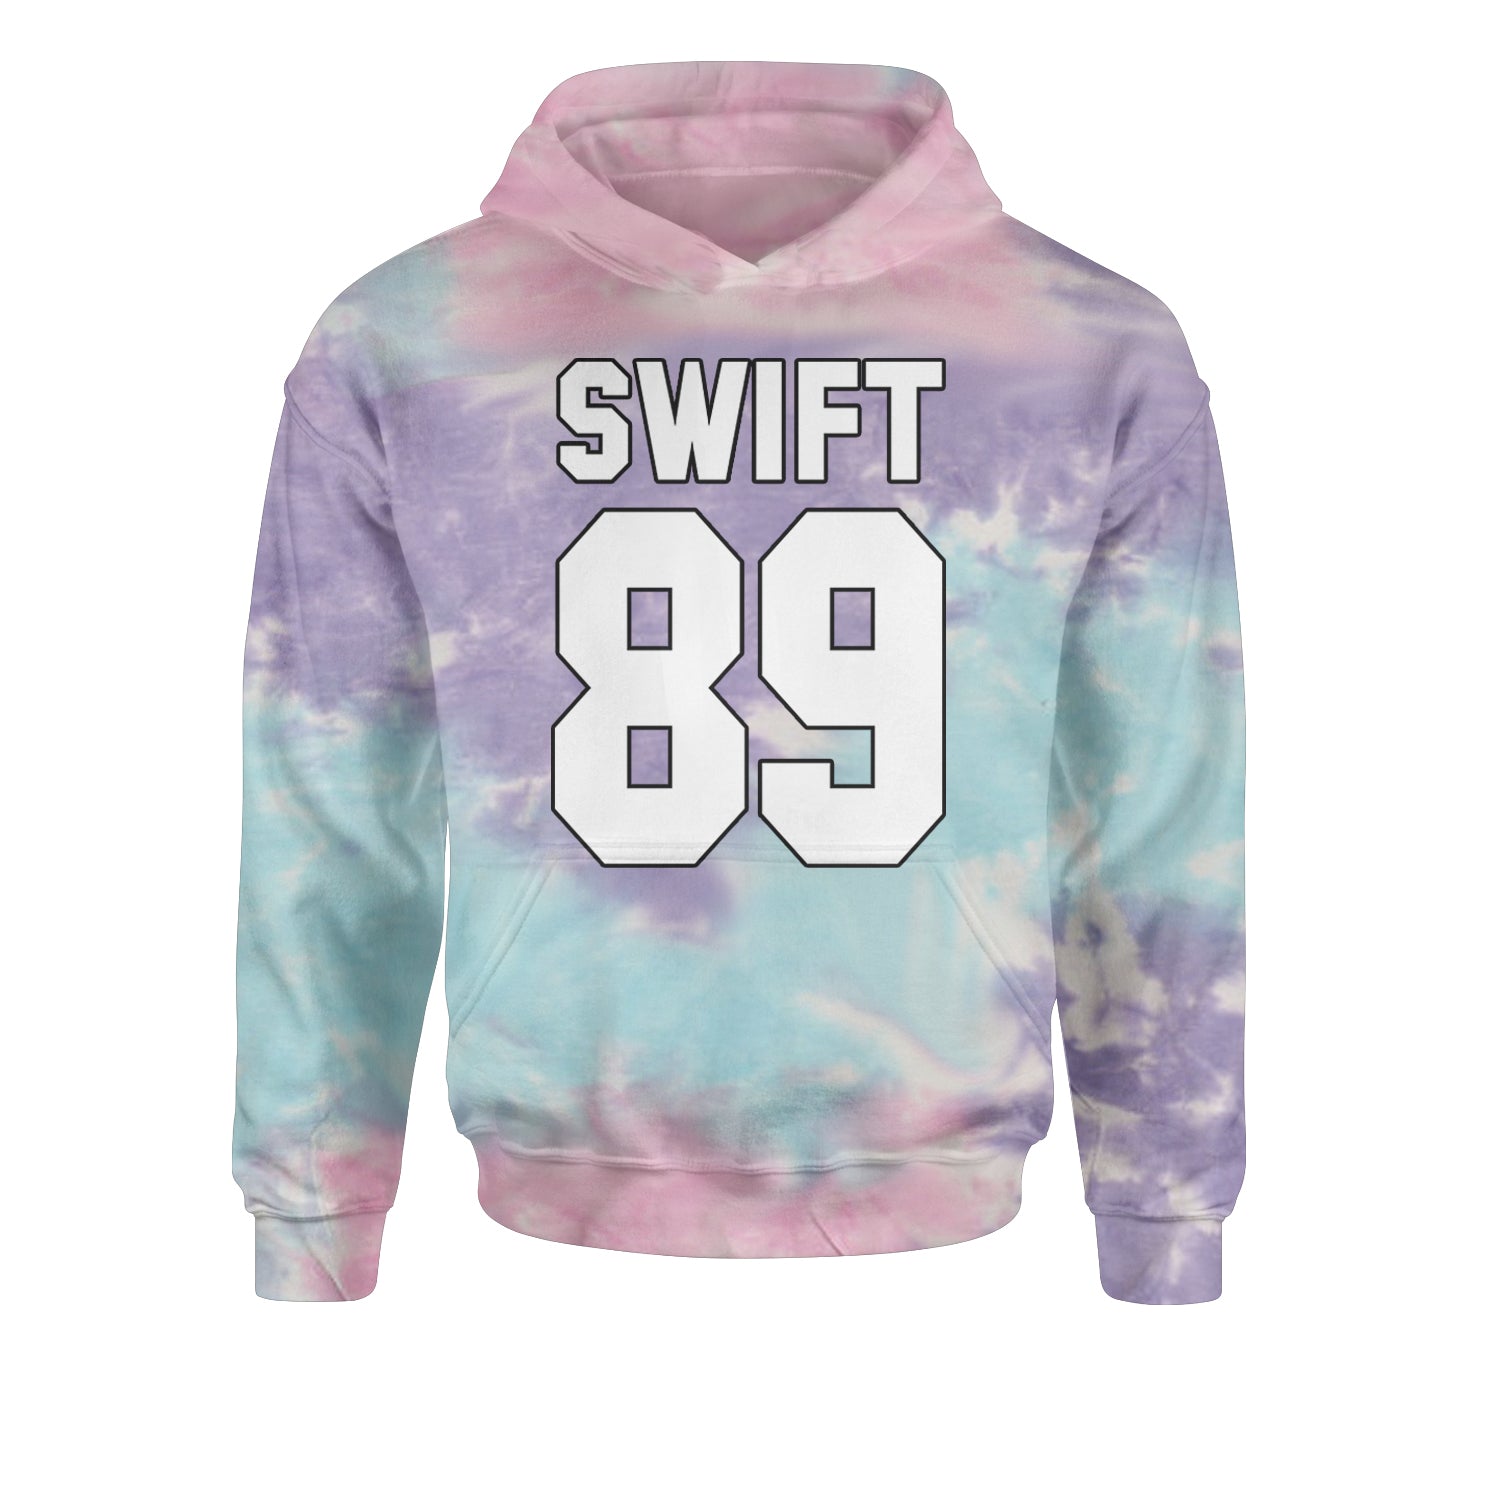 Swift 89 Birth Year Music Fan Era Poets Department Lover Youth-Sized Hoodie Tie-Dye Cotton Candy